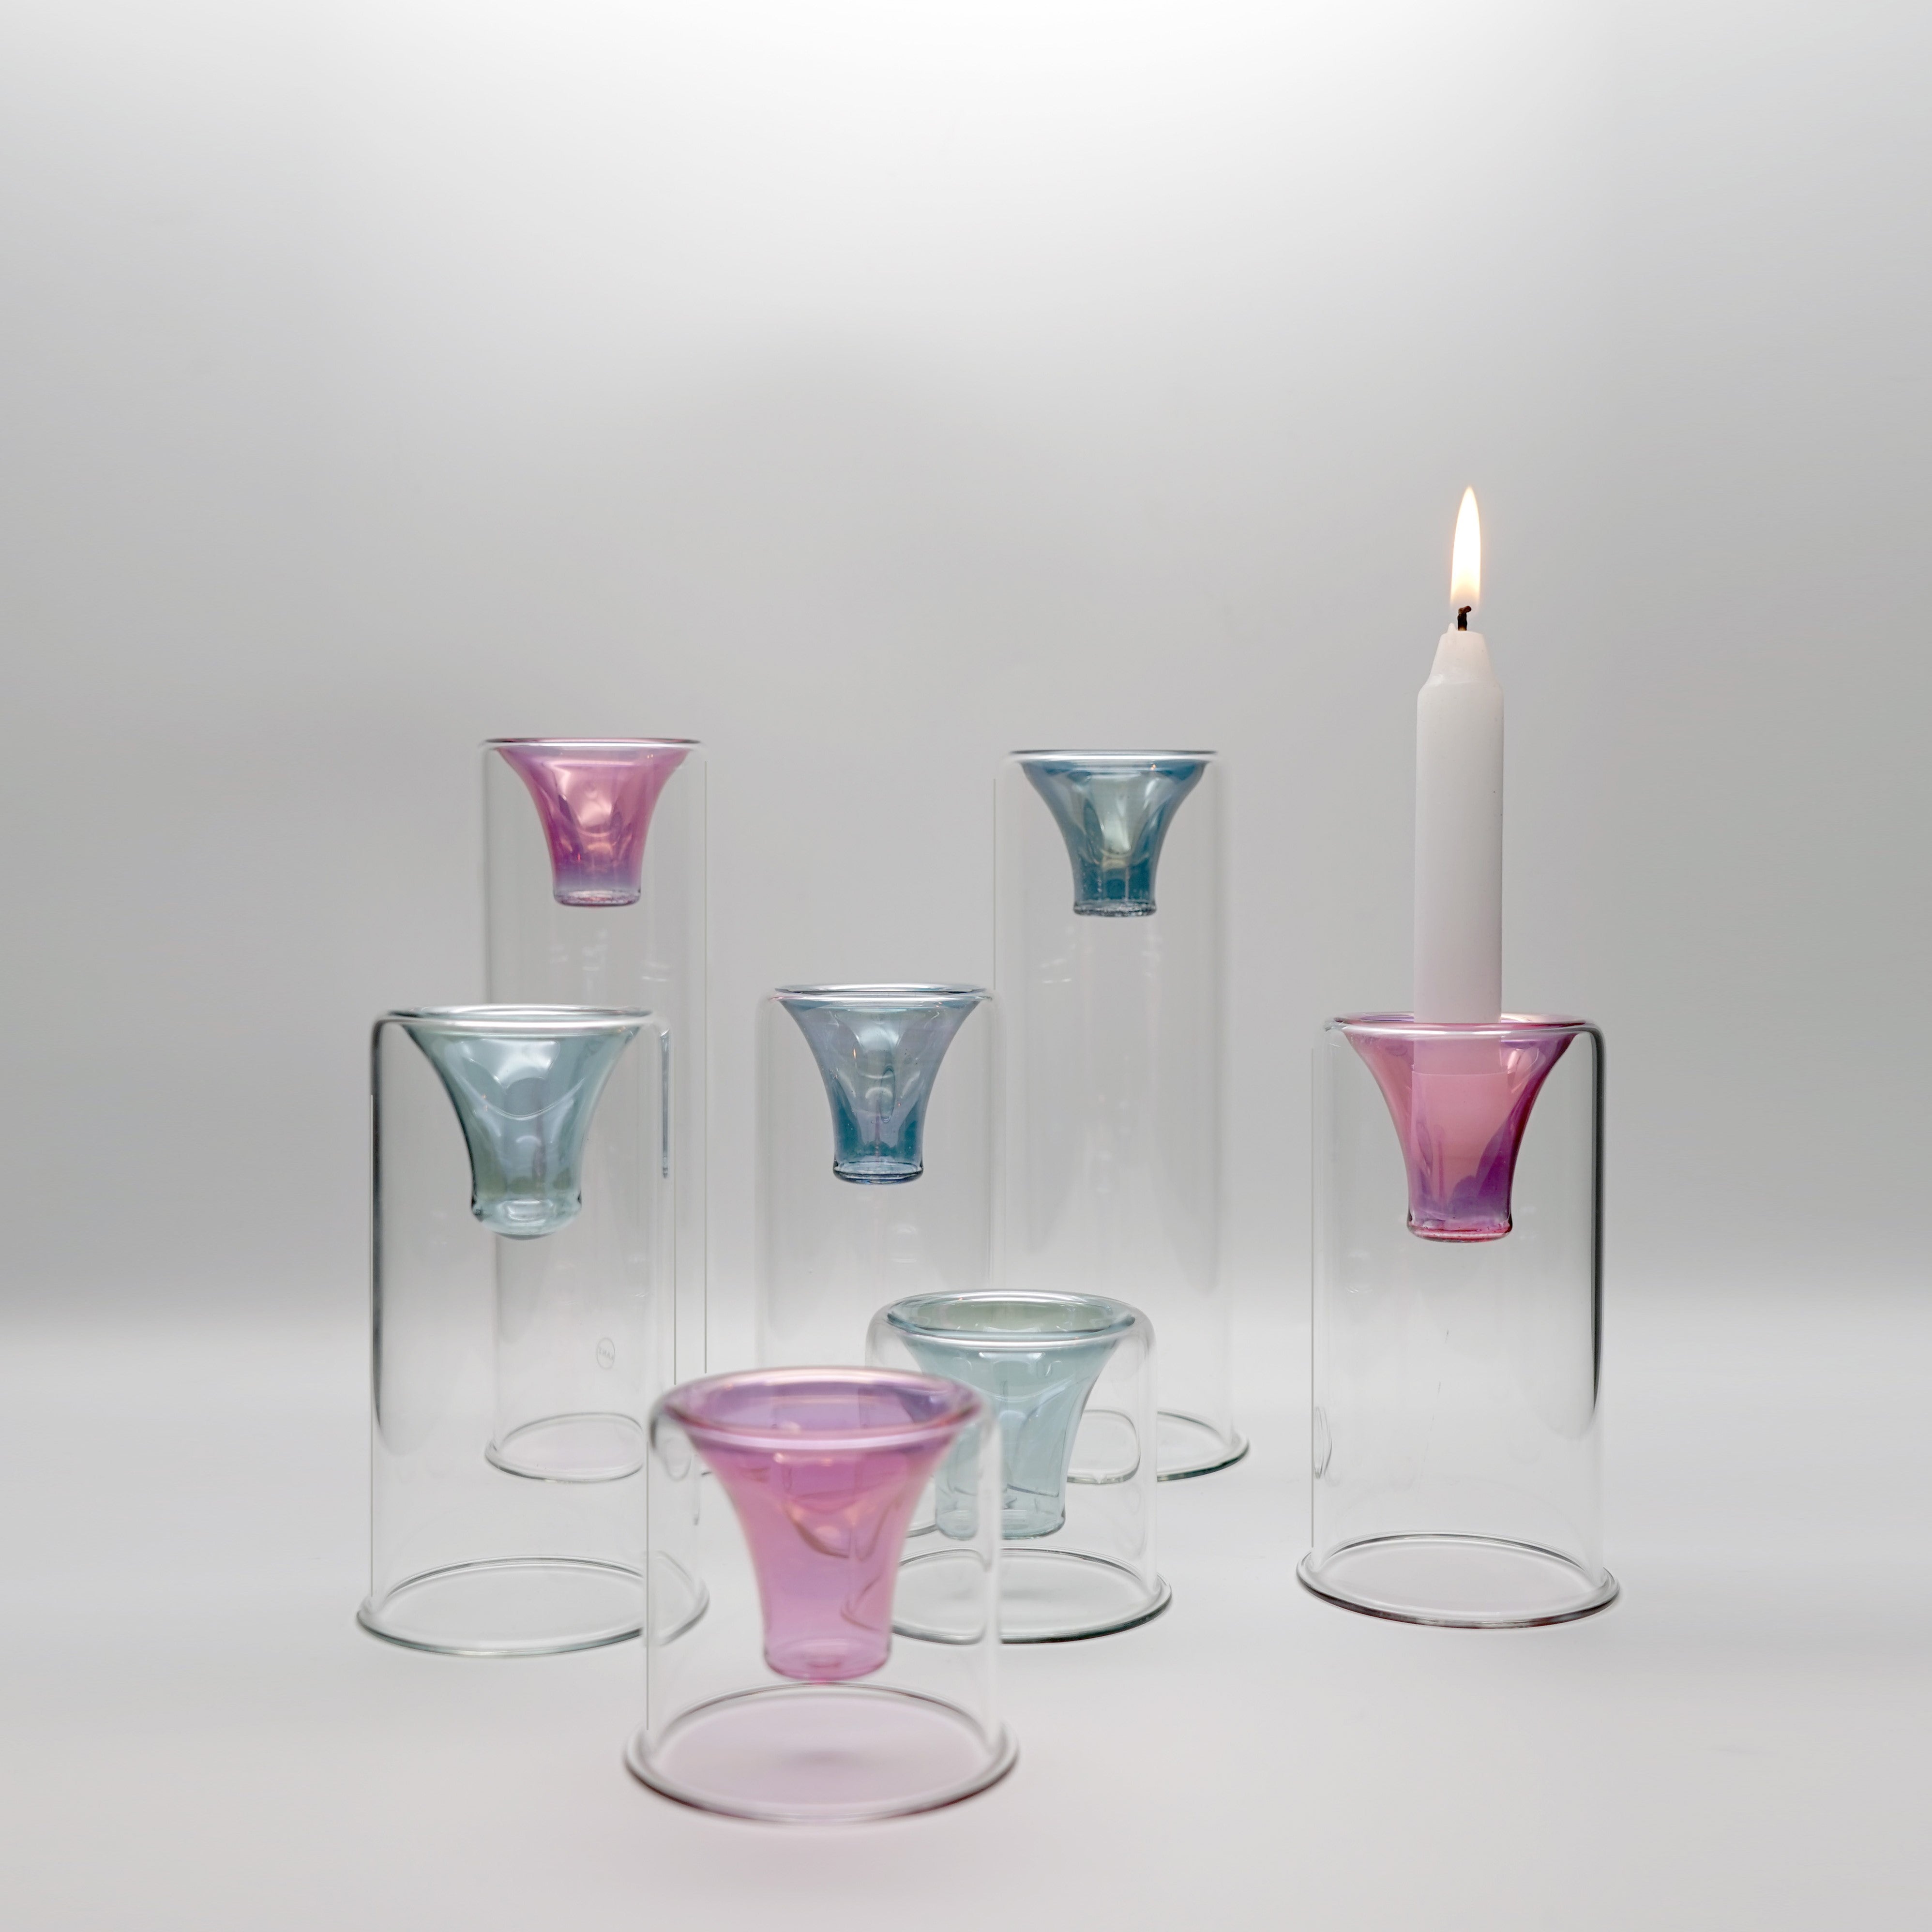 Tharros - small candle holder (comes with three colors) - LAZADO